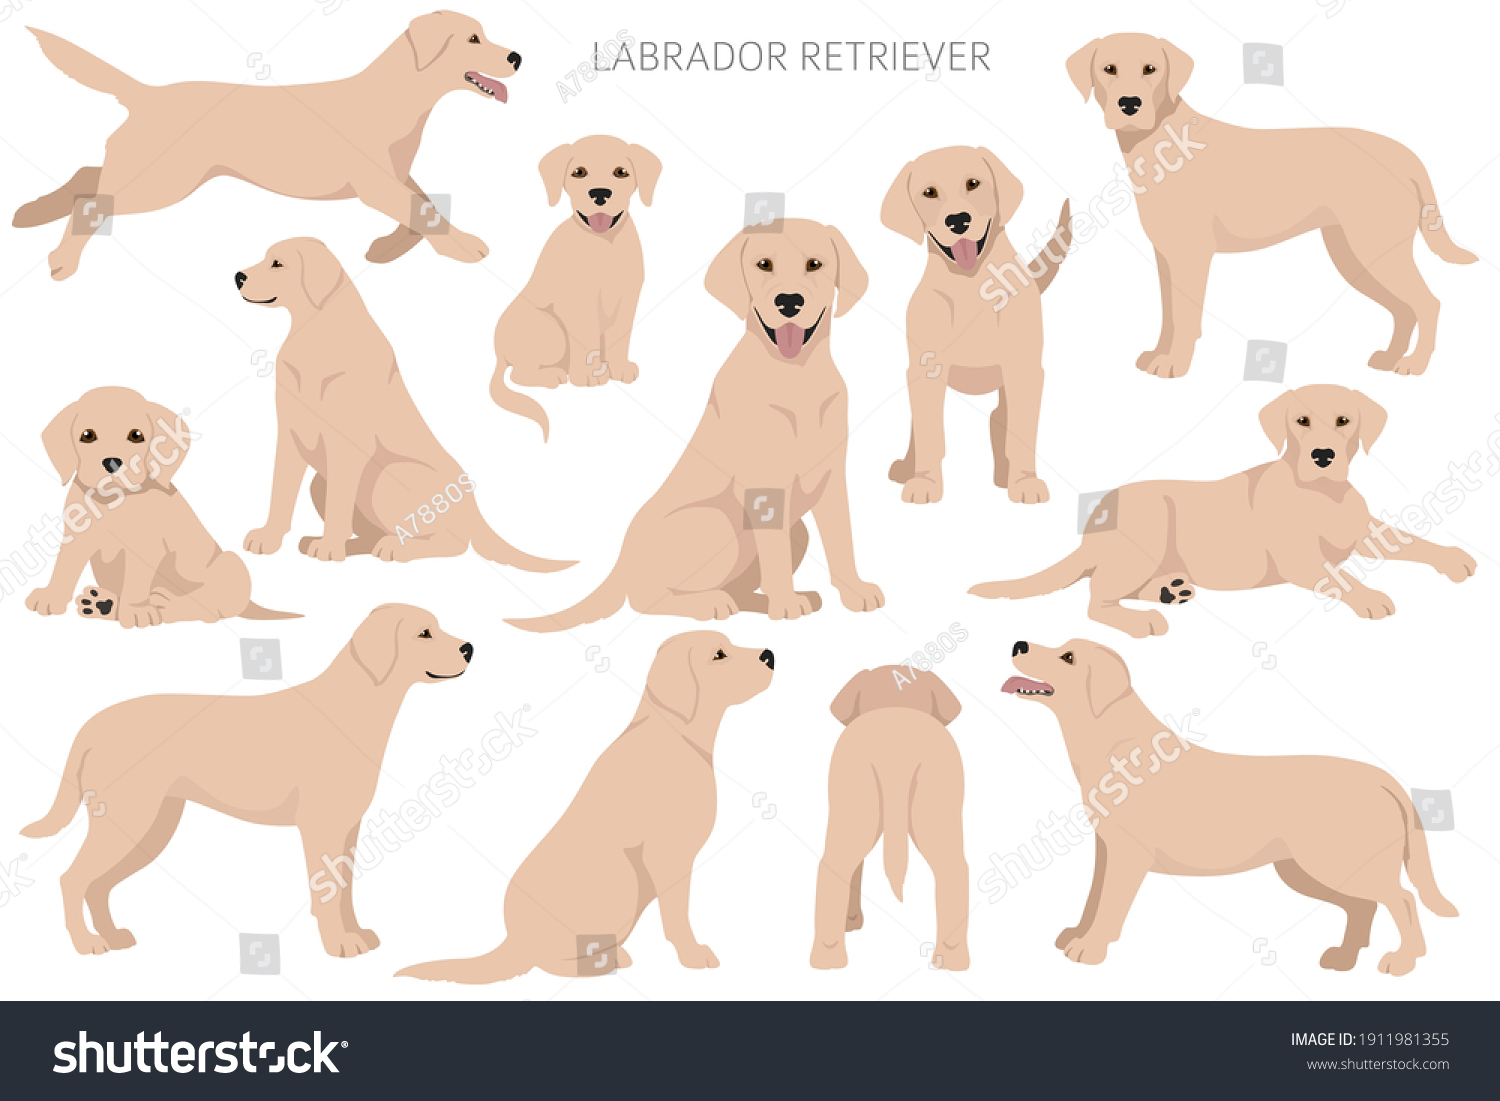 Labrador retriever dogs in different poses and coat colors. Adult and puppy dogs.  Vector illustration #1911981355